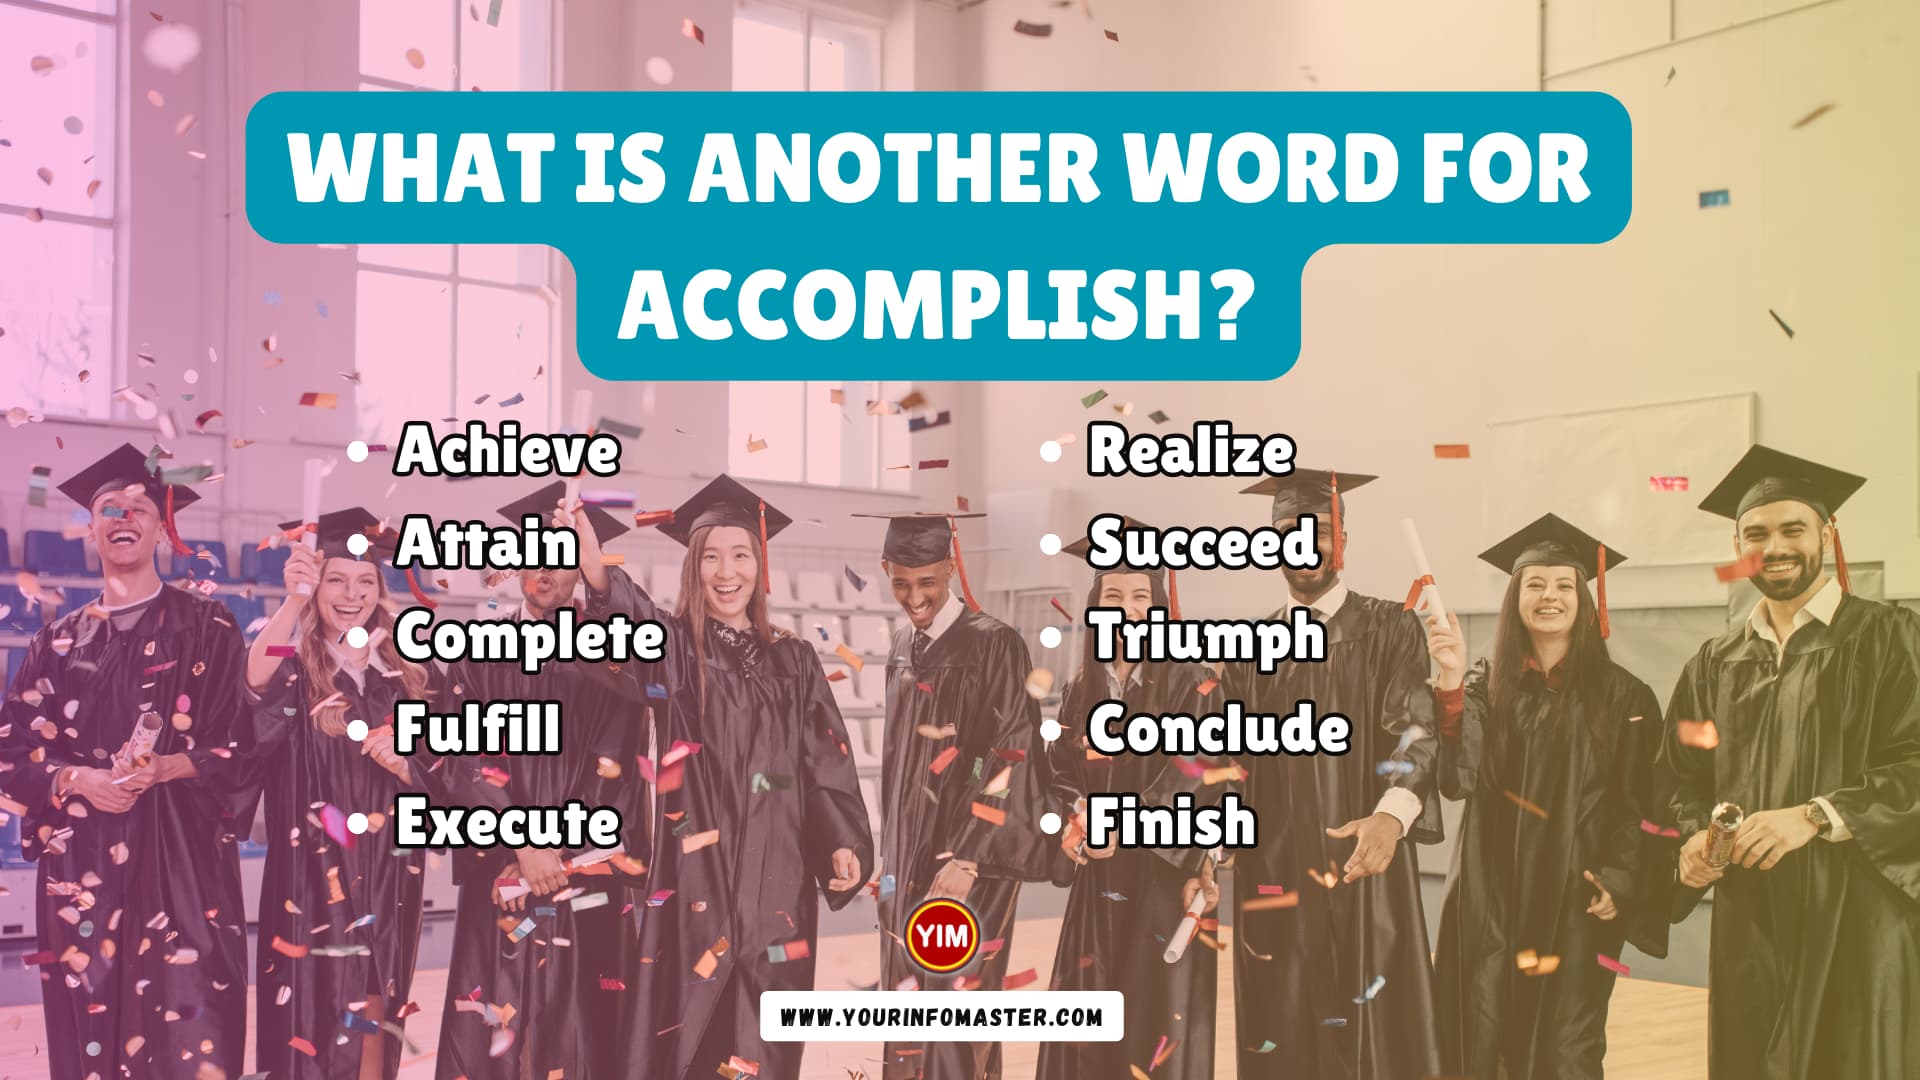 What is another word for Accomplish